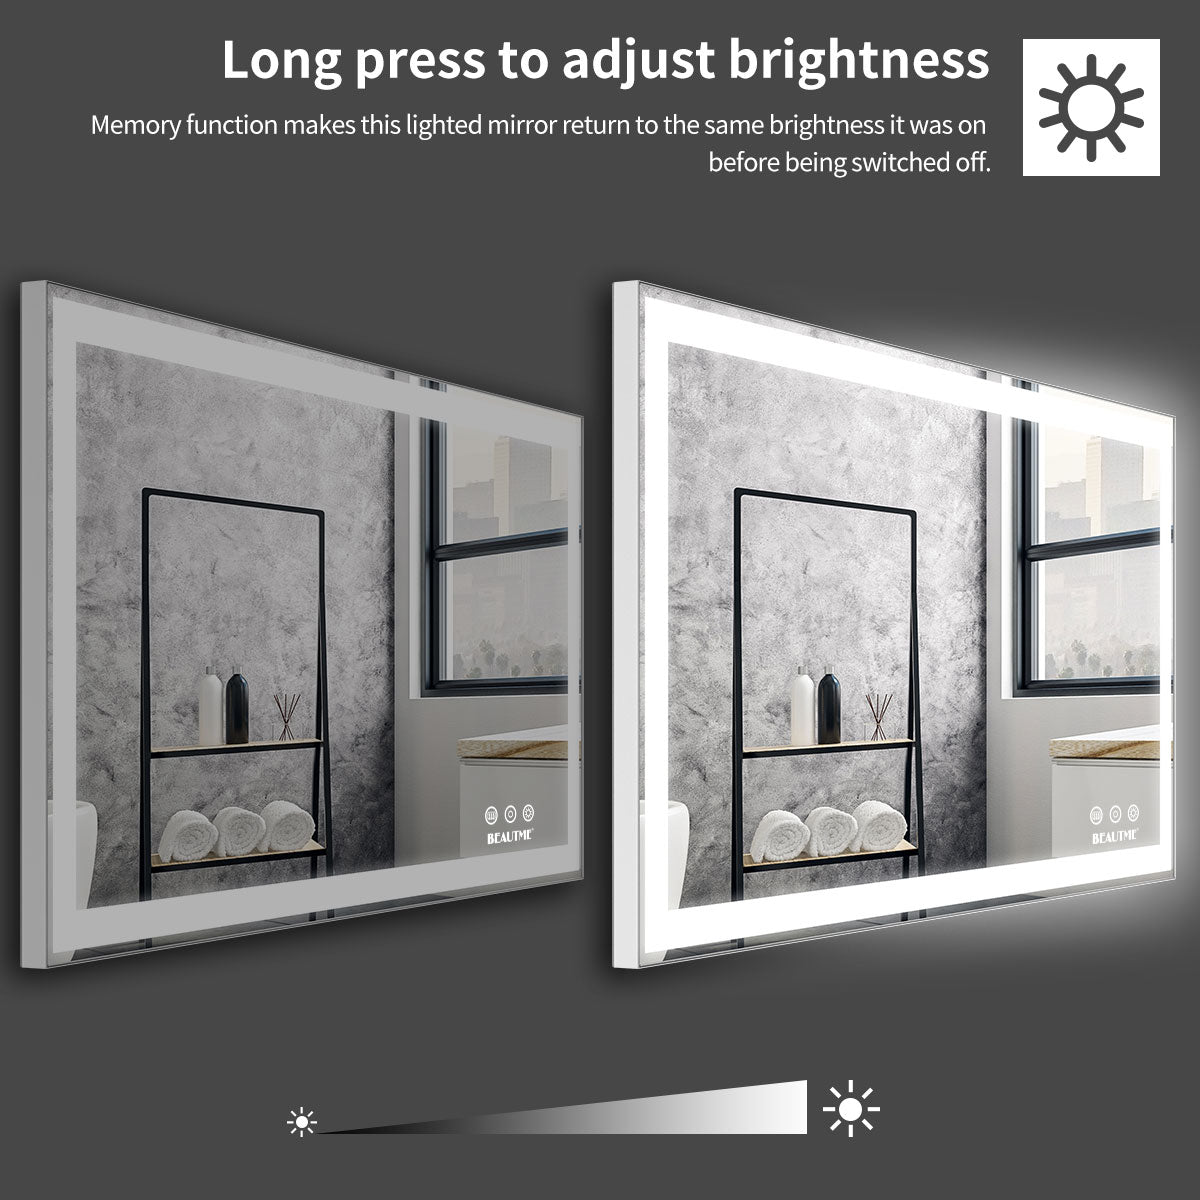 32x40 inch LED Bathroom Vanity Mirror Wall Mounted Adjustable White/Warm/Natural Lights Anti-Fog Touch Switch with Memory Modern Smart Large Bathroom Mirrors